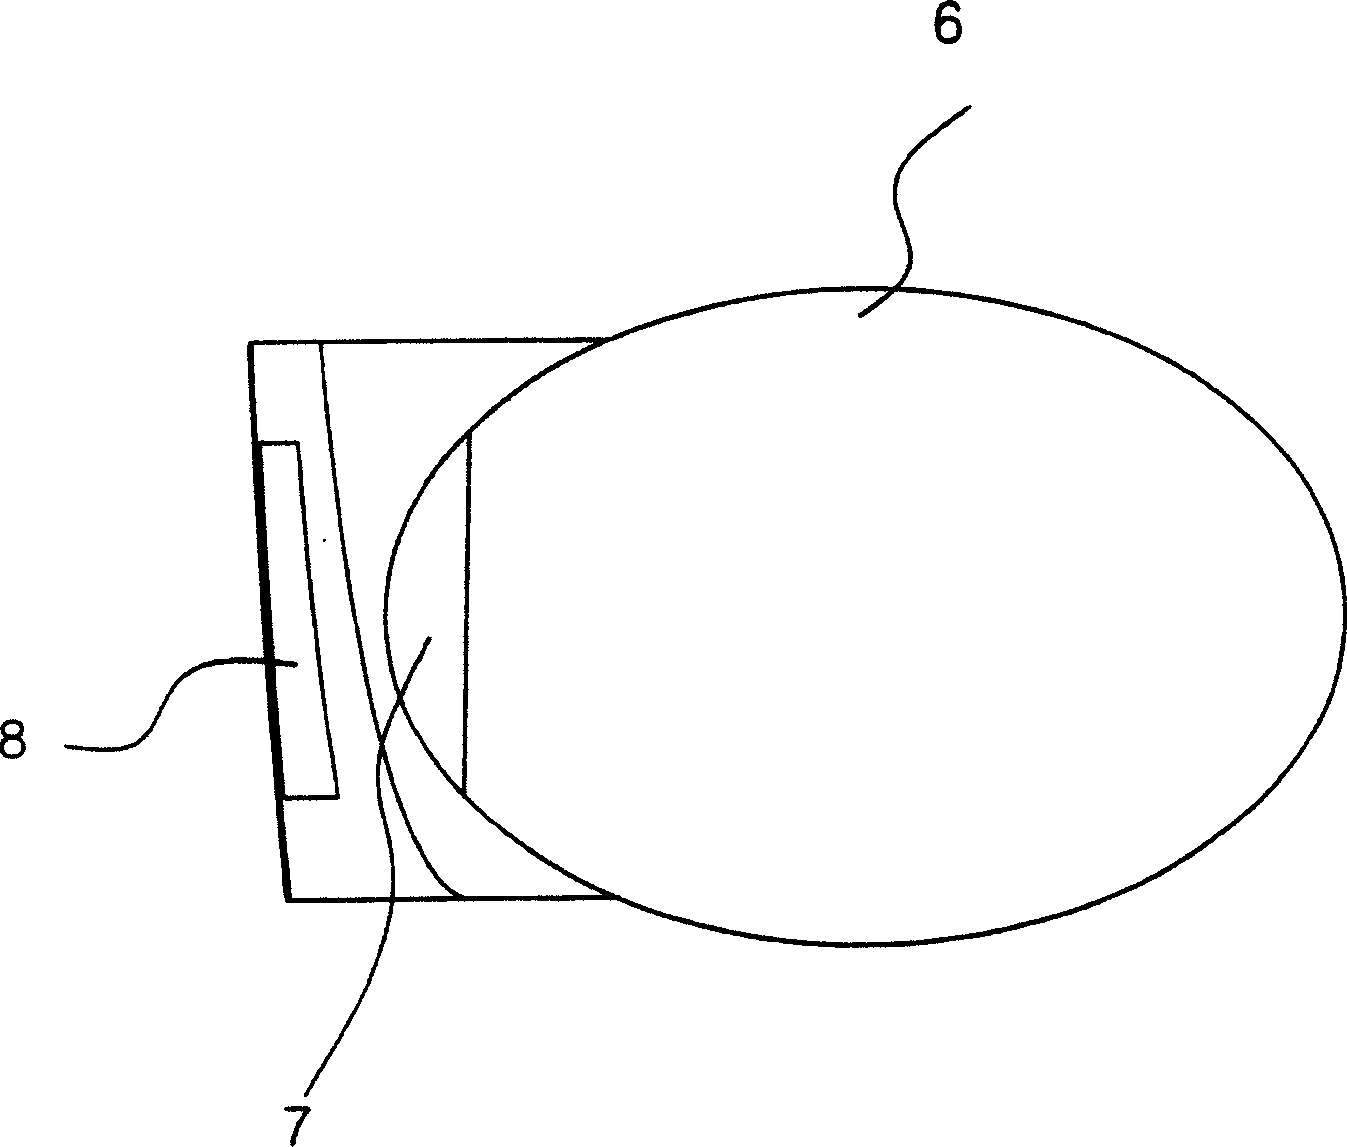 Speaker with discharge opening for horizontal output of voice